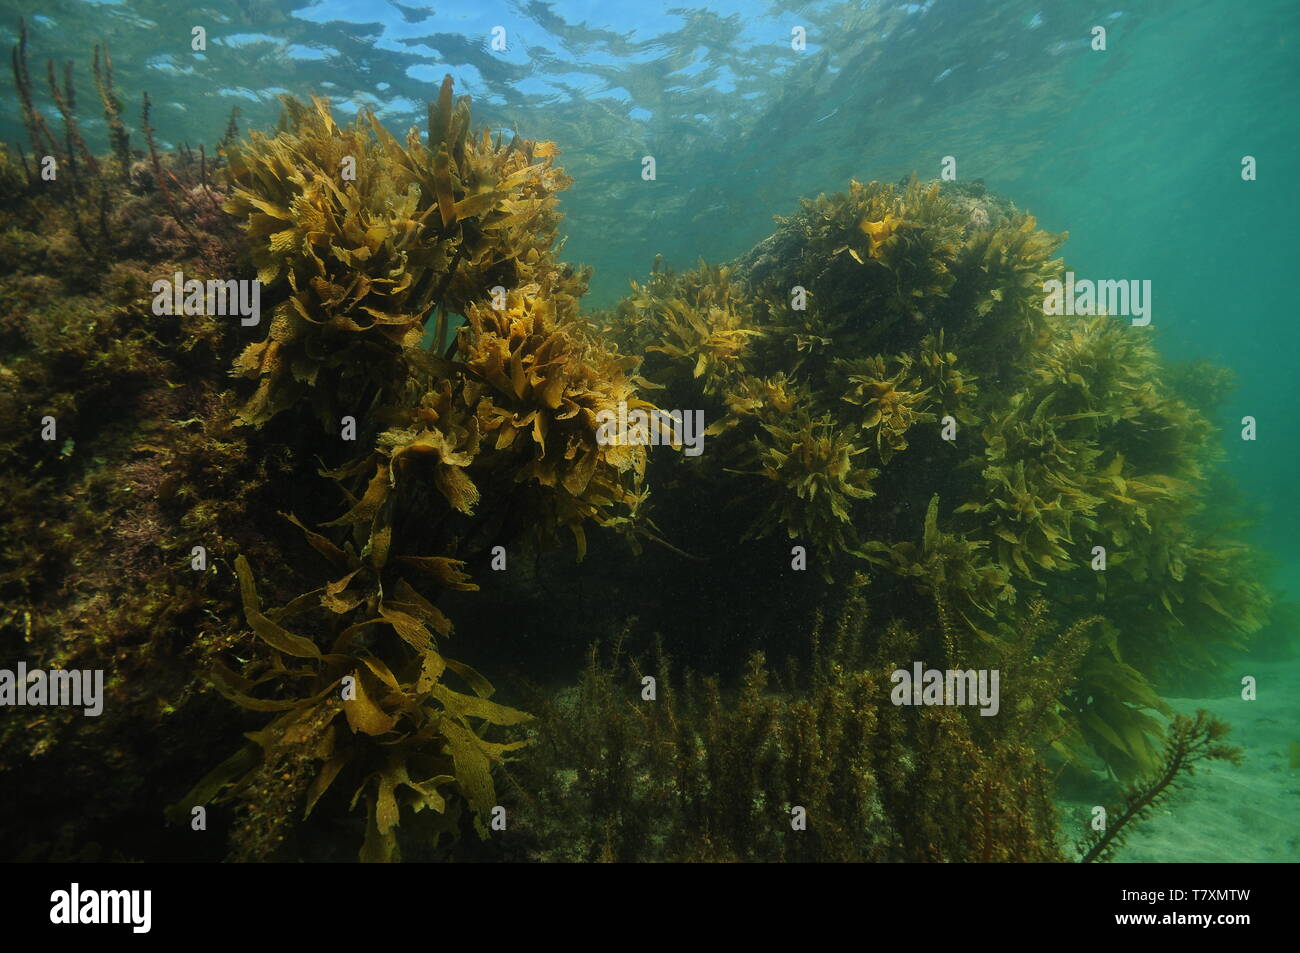 Large rocks on flat sandy bottom in shallow water. Their walls are covered with dense growth of seaweeds and brown kelp. Stock Photo